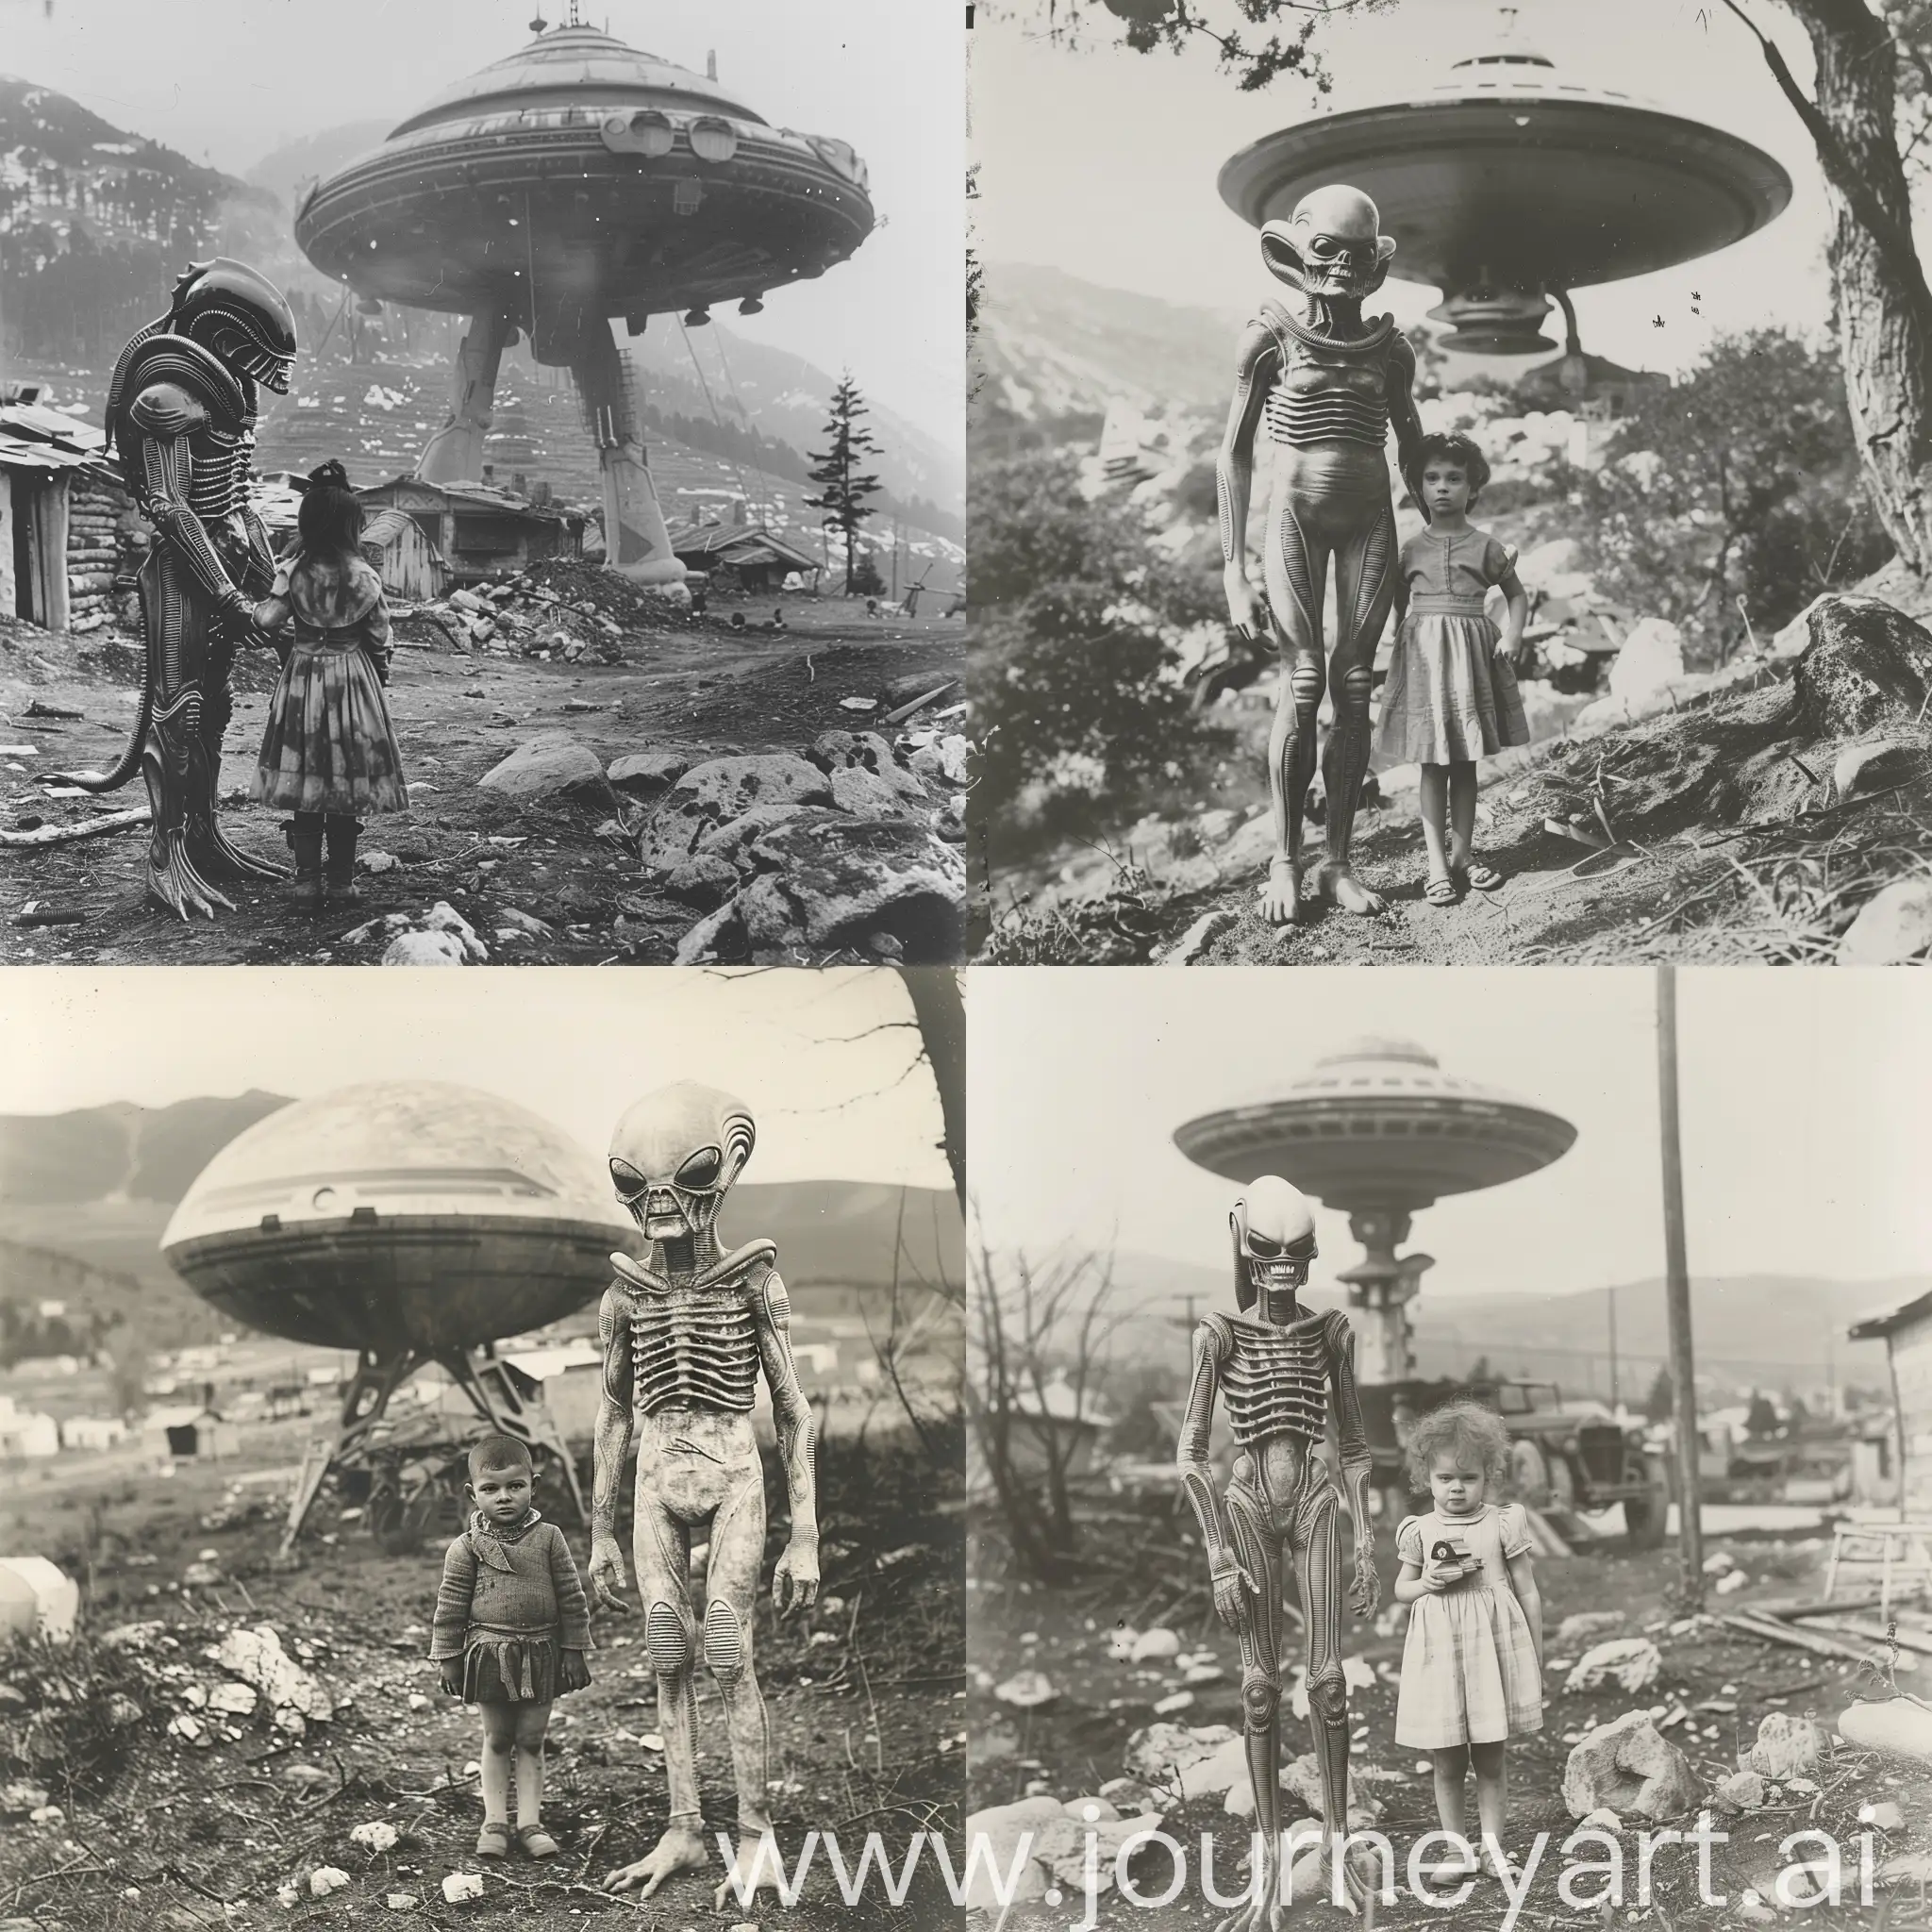 1930-Alien-Encounter-Realistic-Black-and-White-Photo-with-Intricate-Details